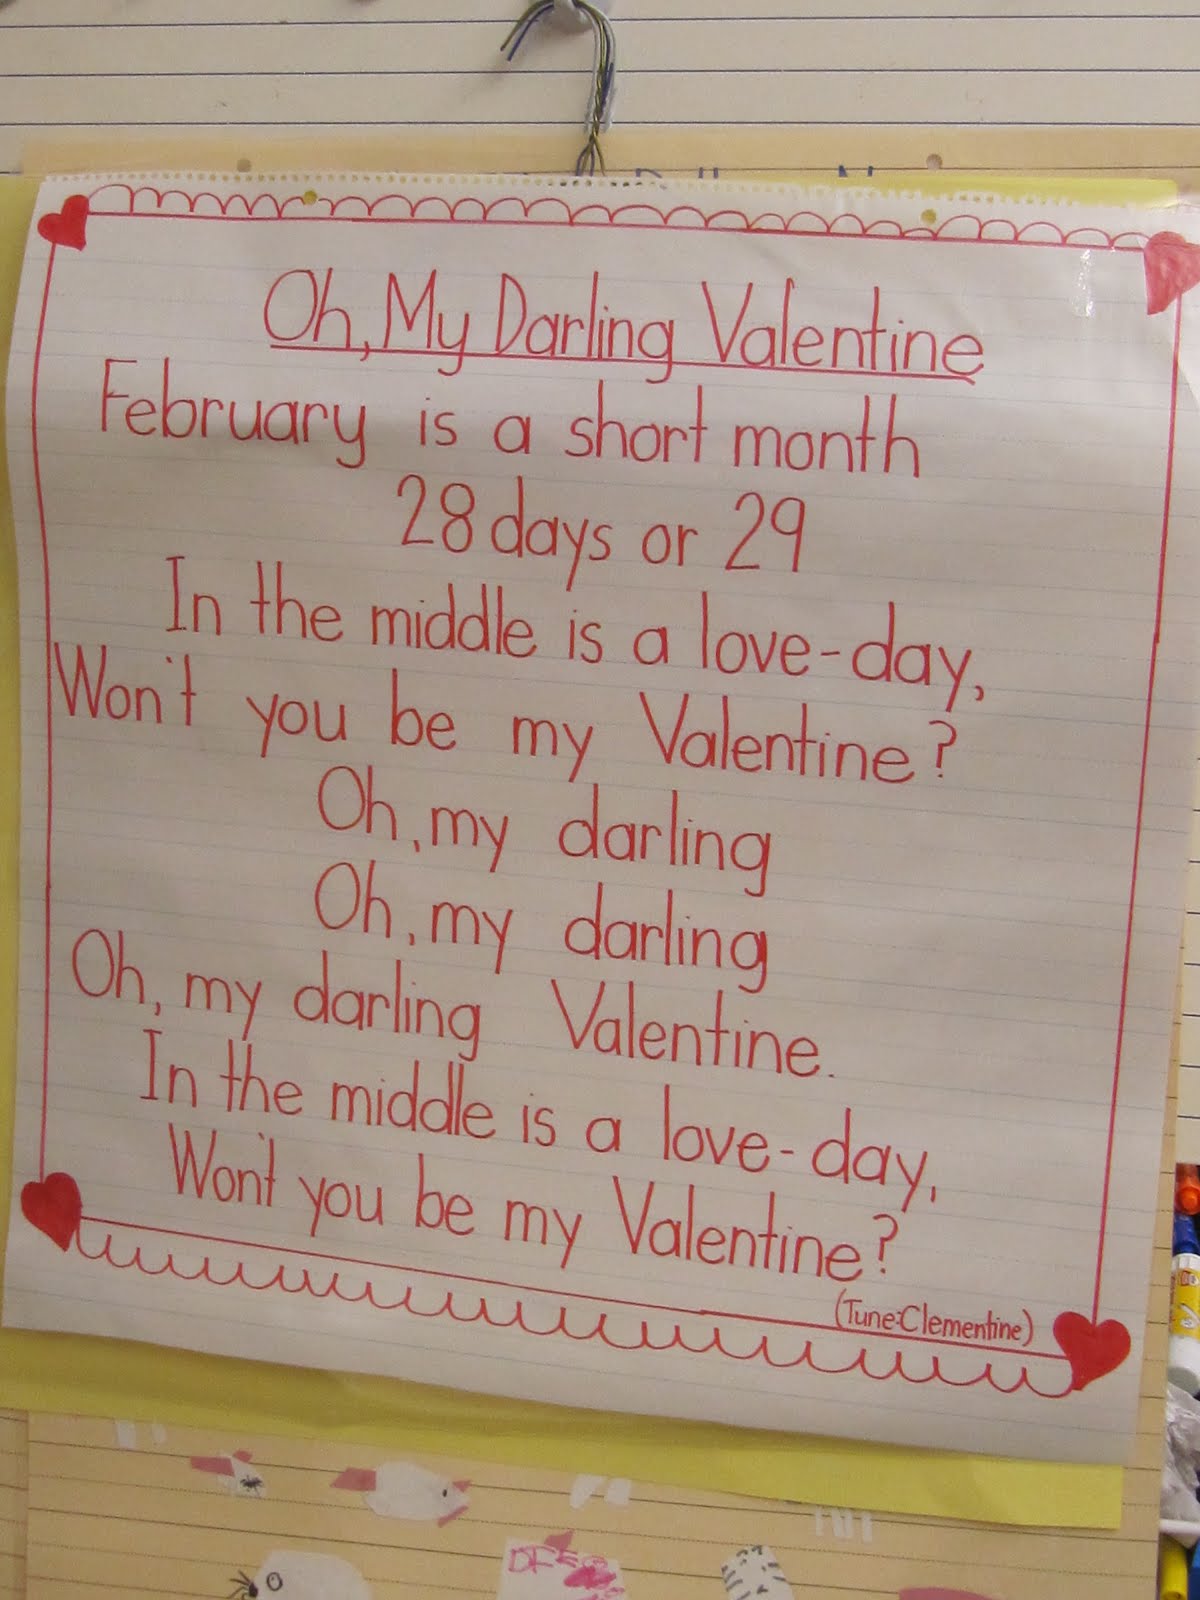 Joyful Learning In KC: Valentines Poems and Songs